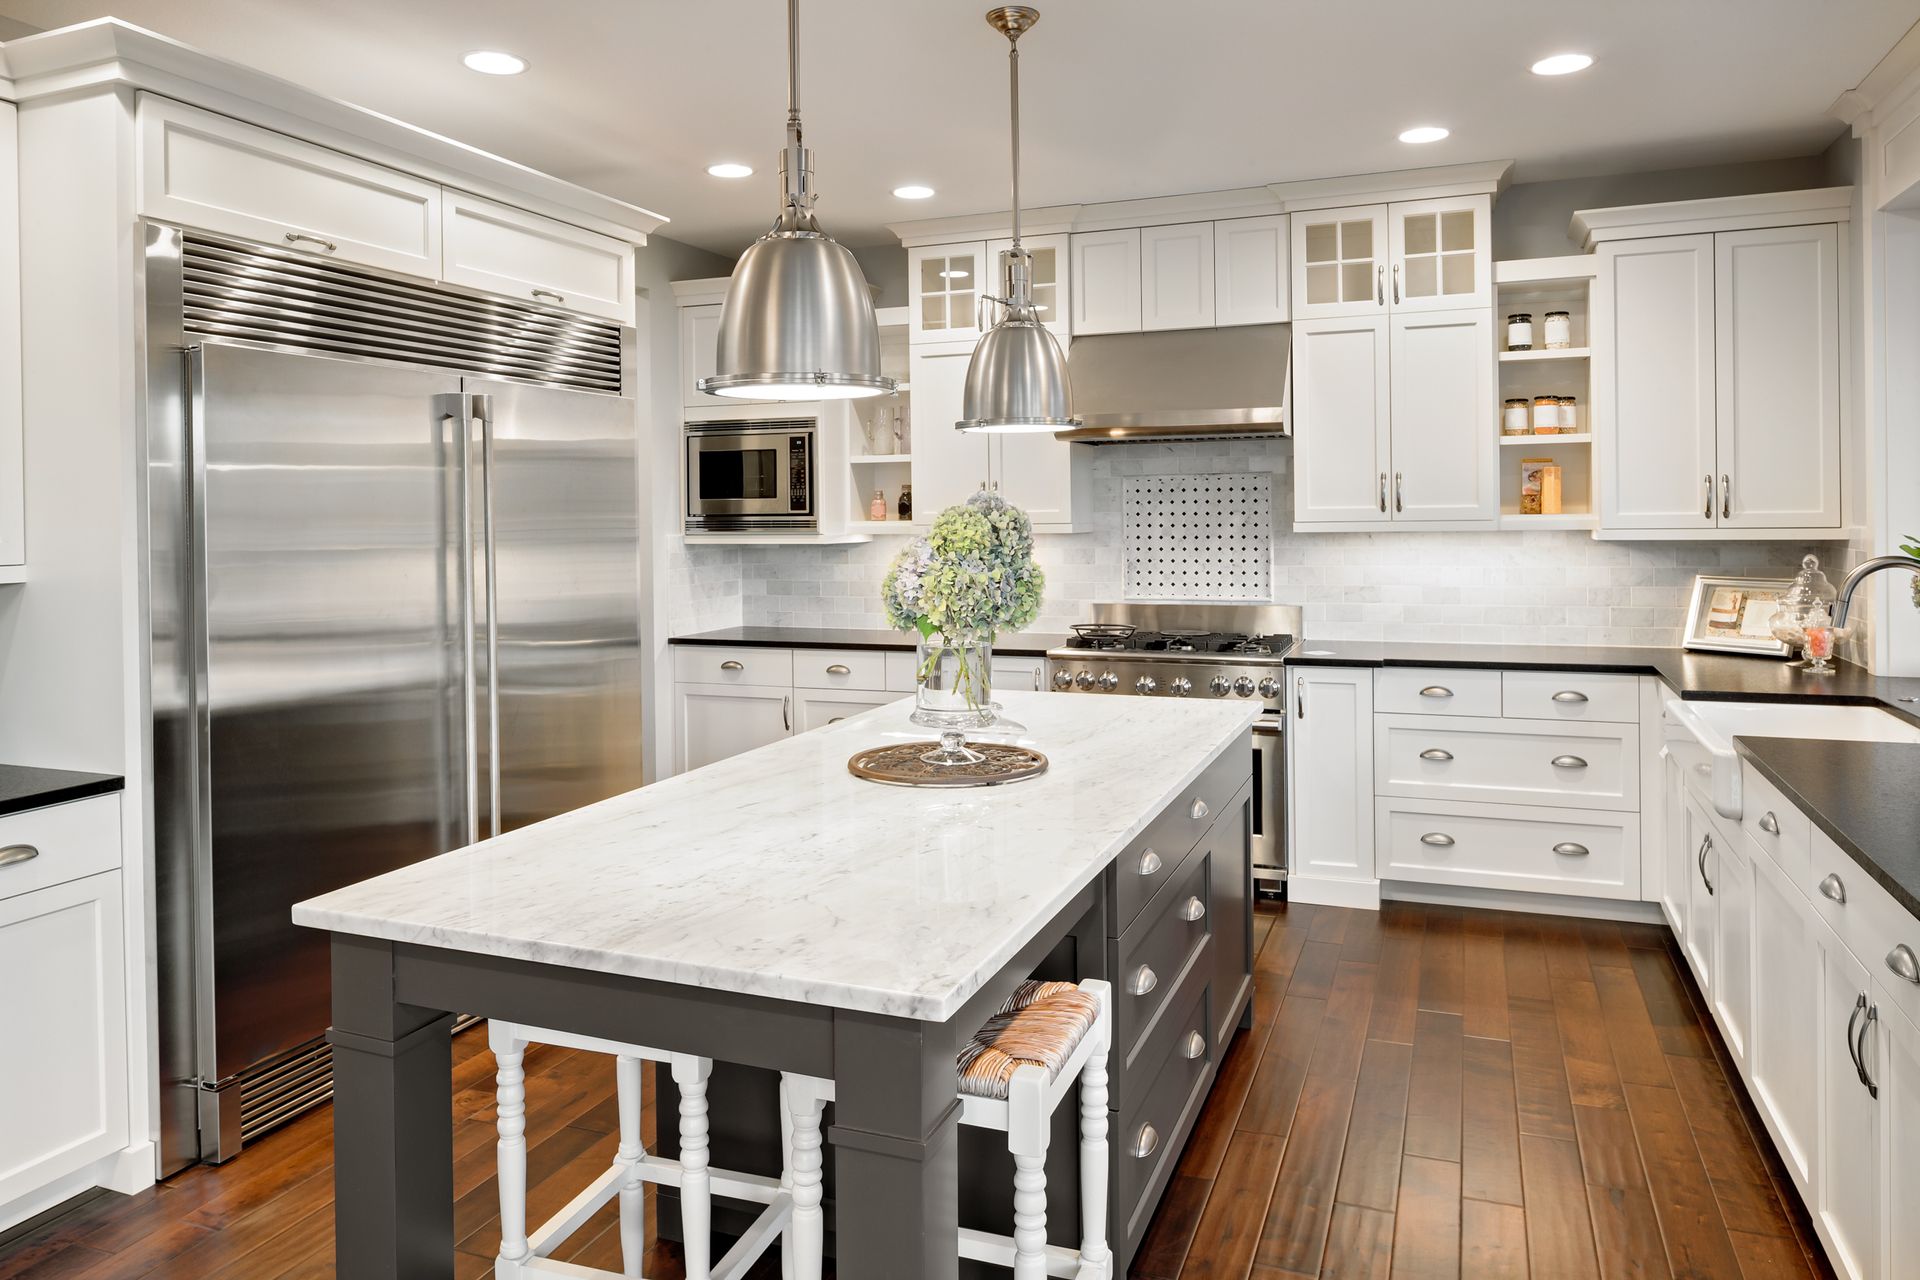 a kitchen with white cabinets and stainless steel appliances and a large island in the middle .